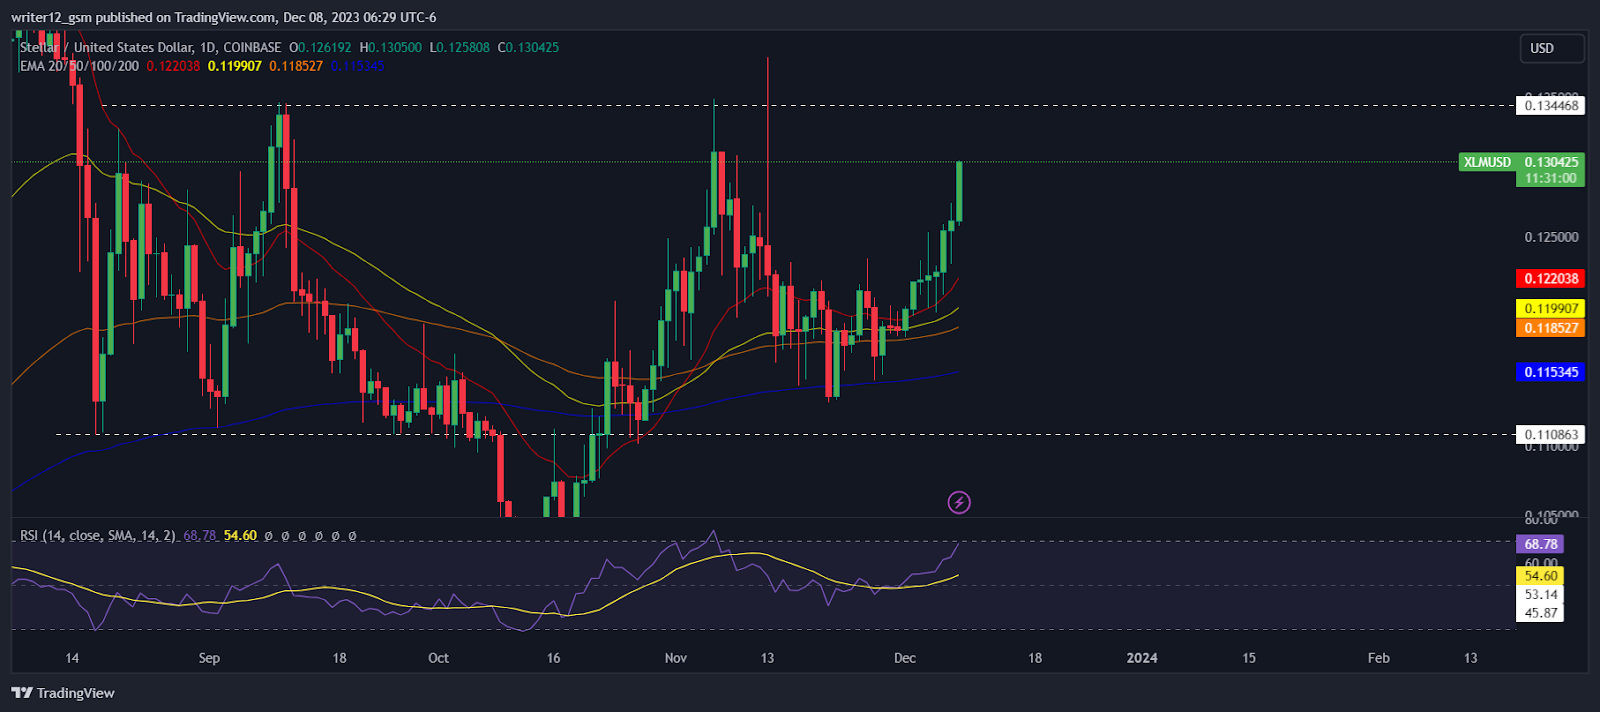 Stellar Crypto Analysis: XLM Aims For a Breakout Above $0.13